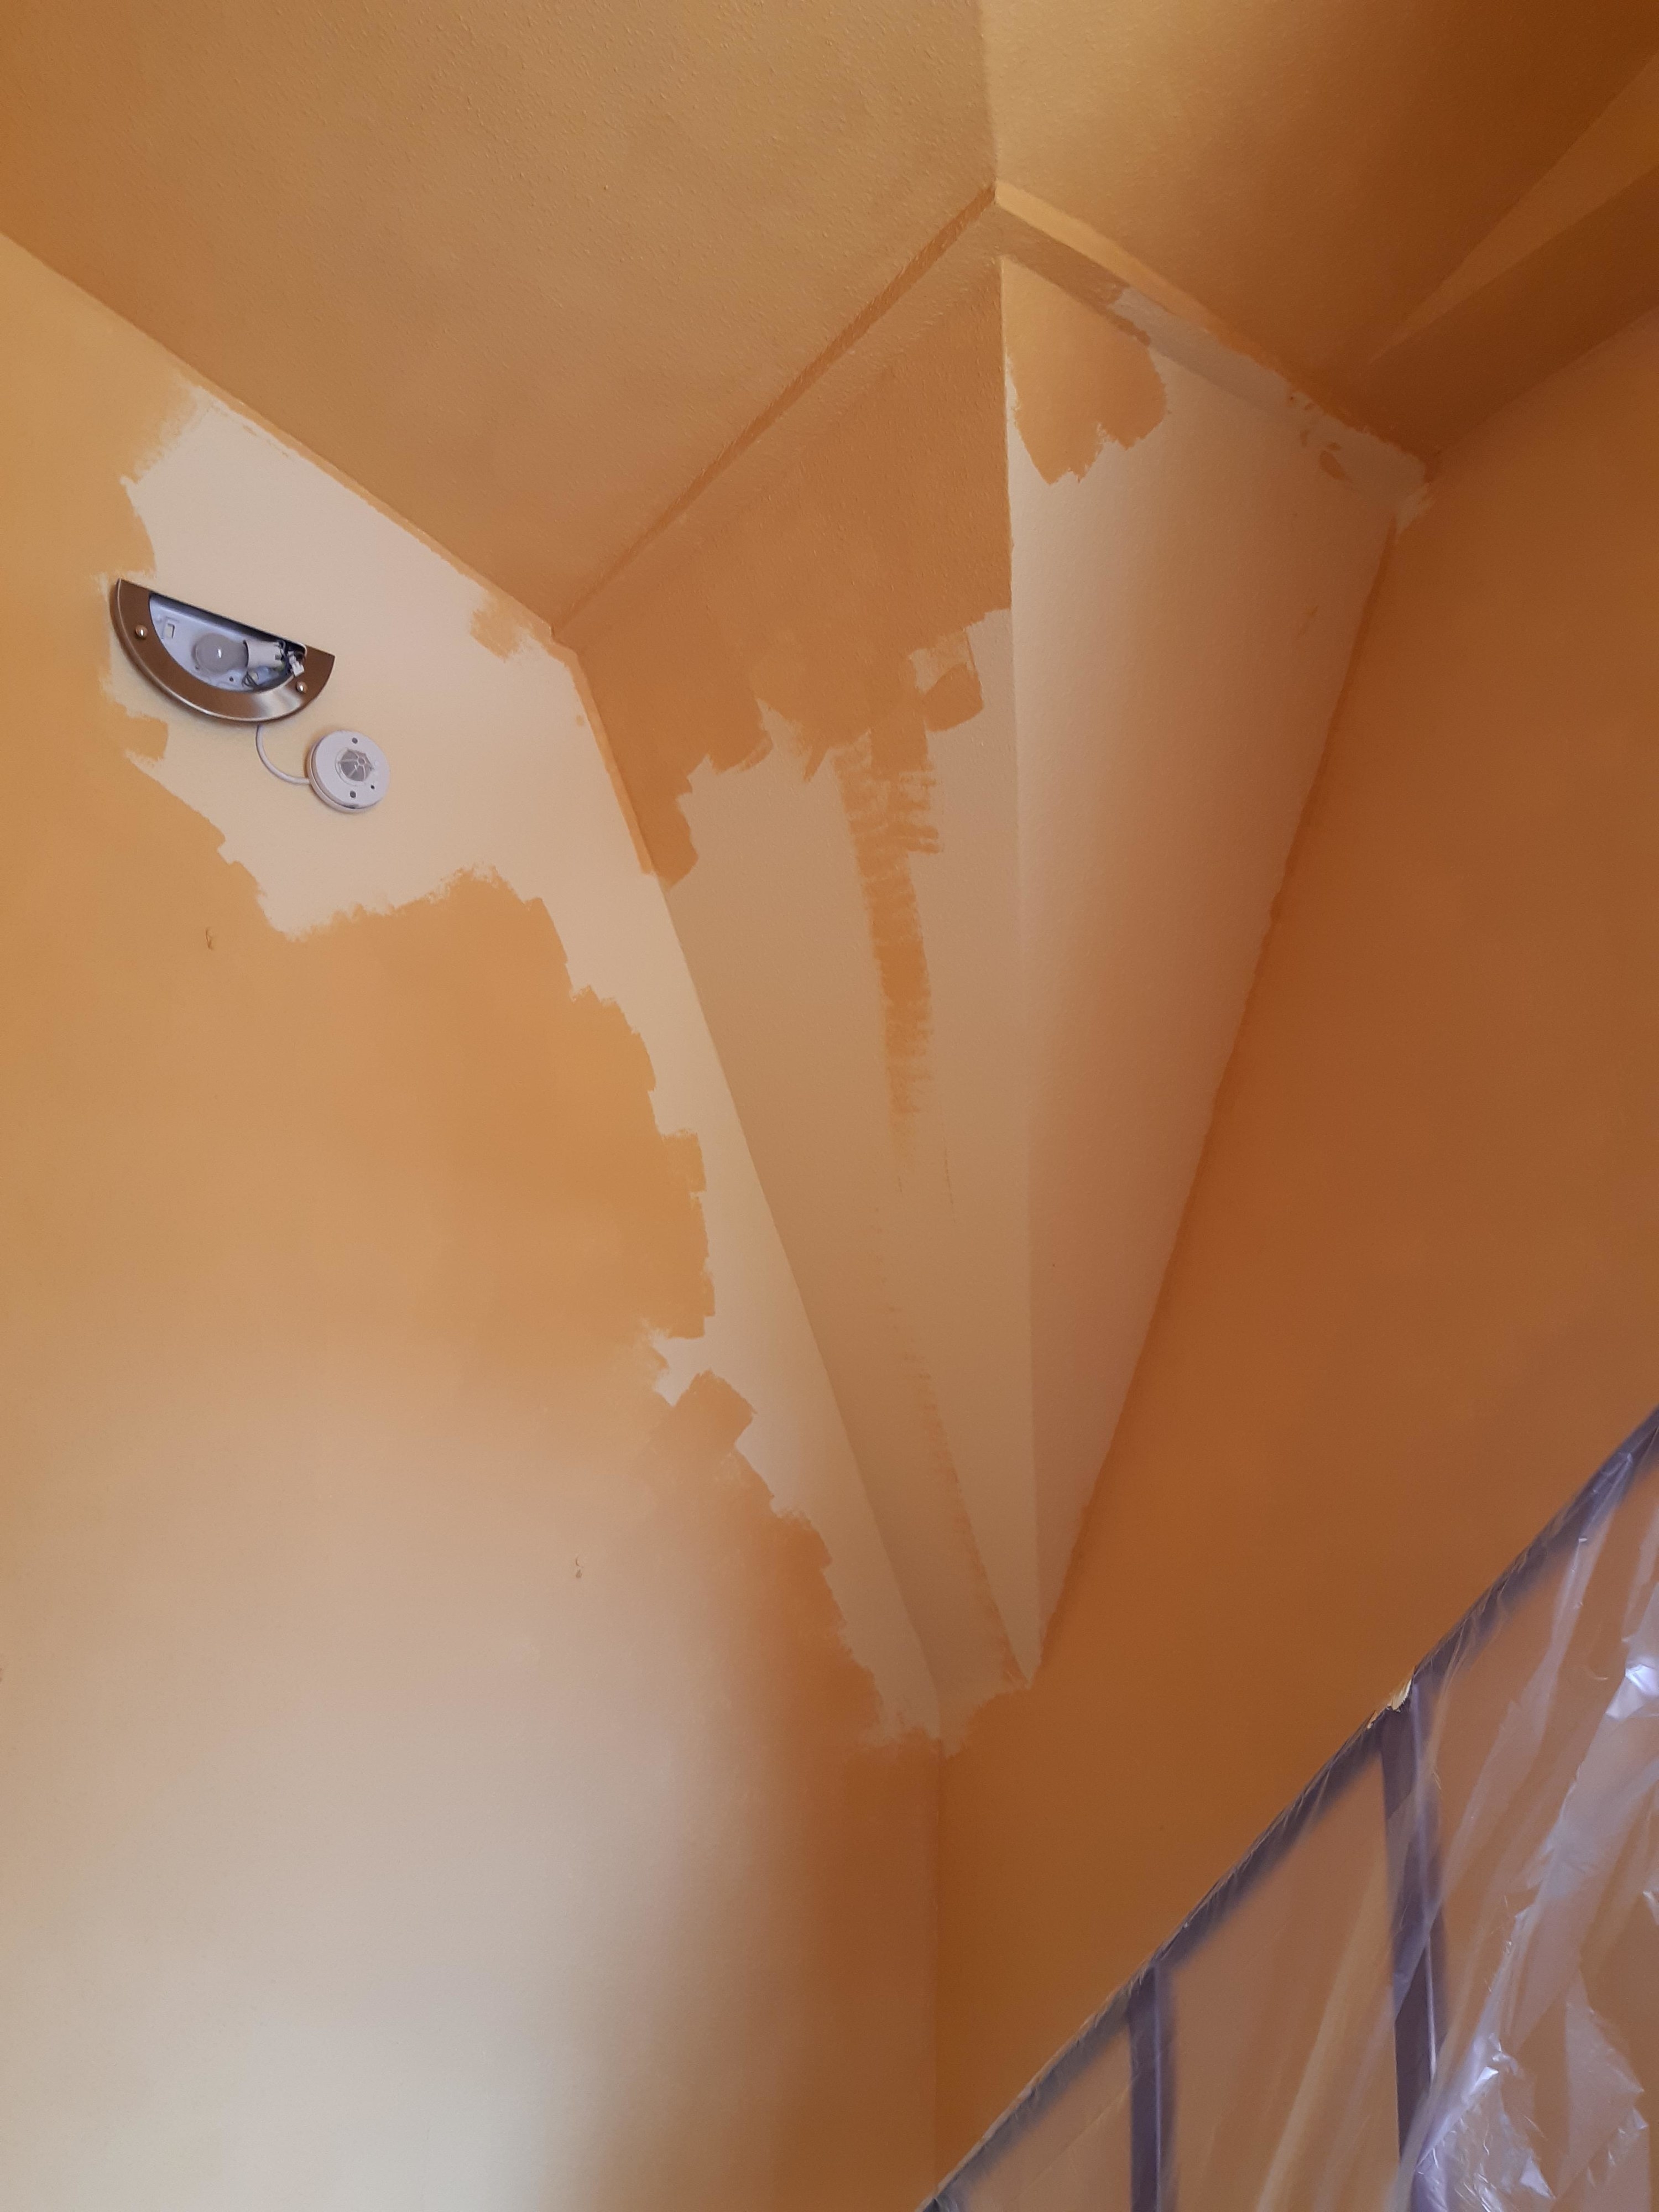 Barely painted wall and ceiling